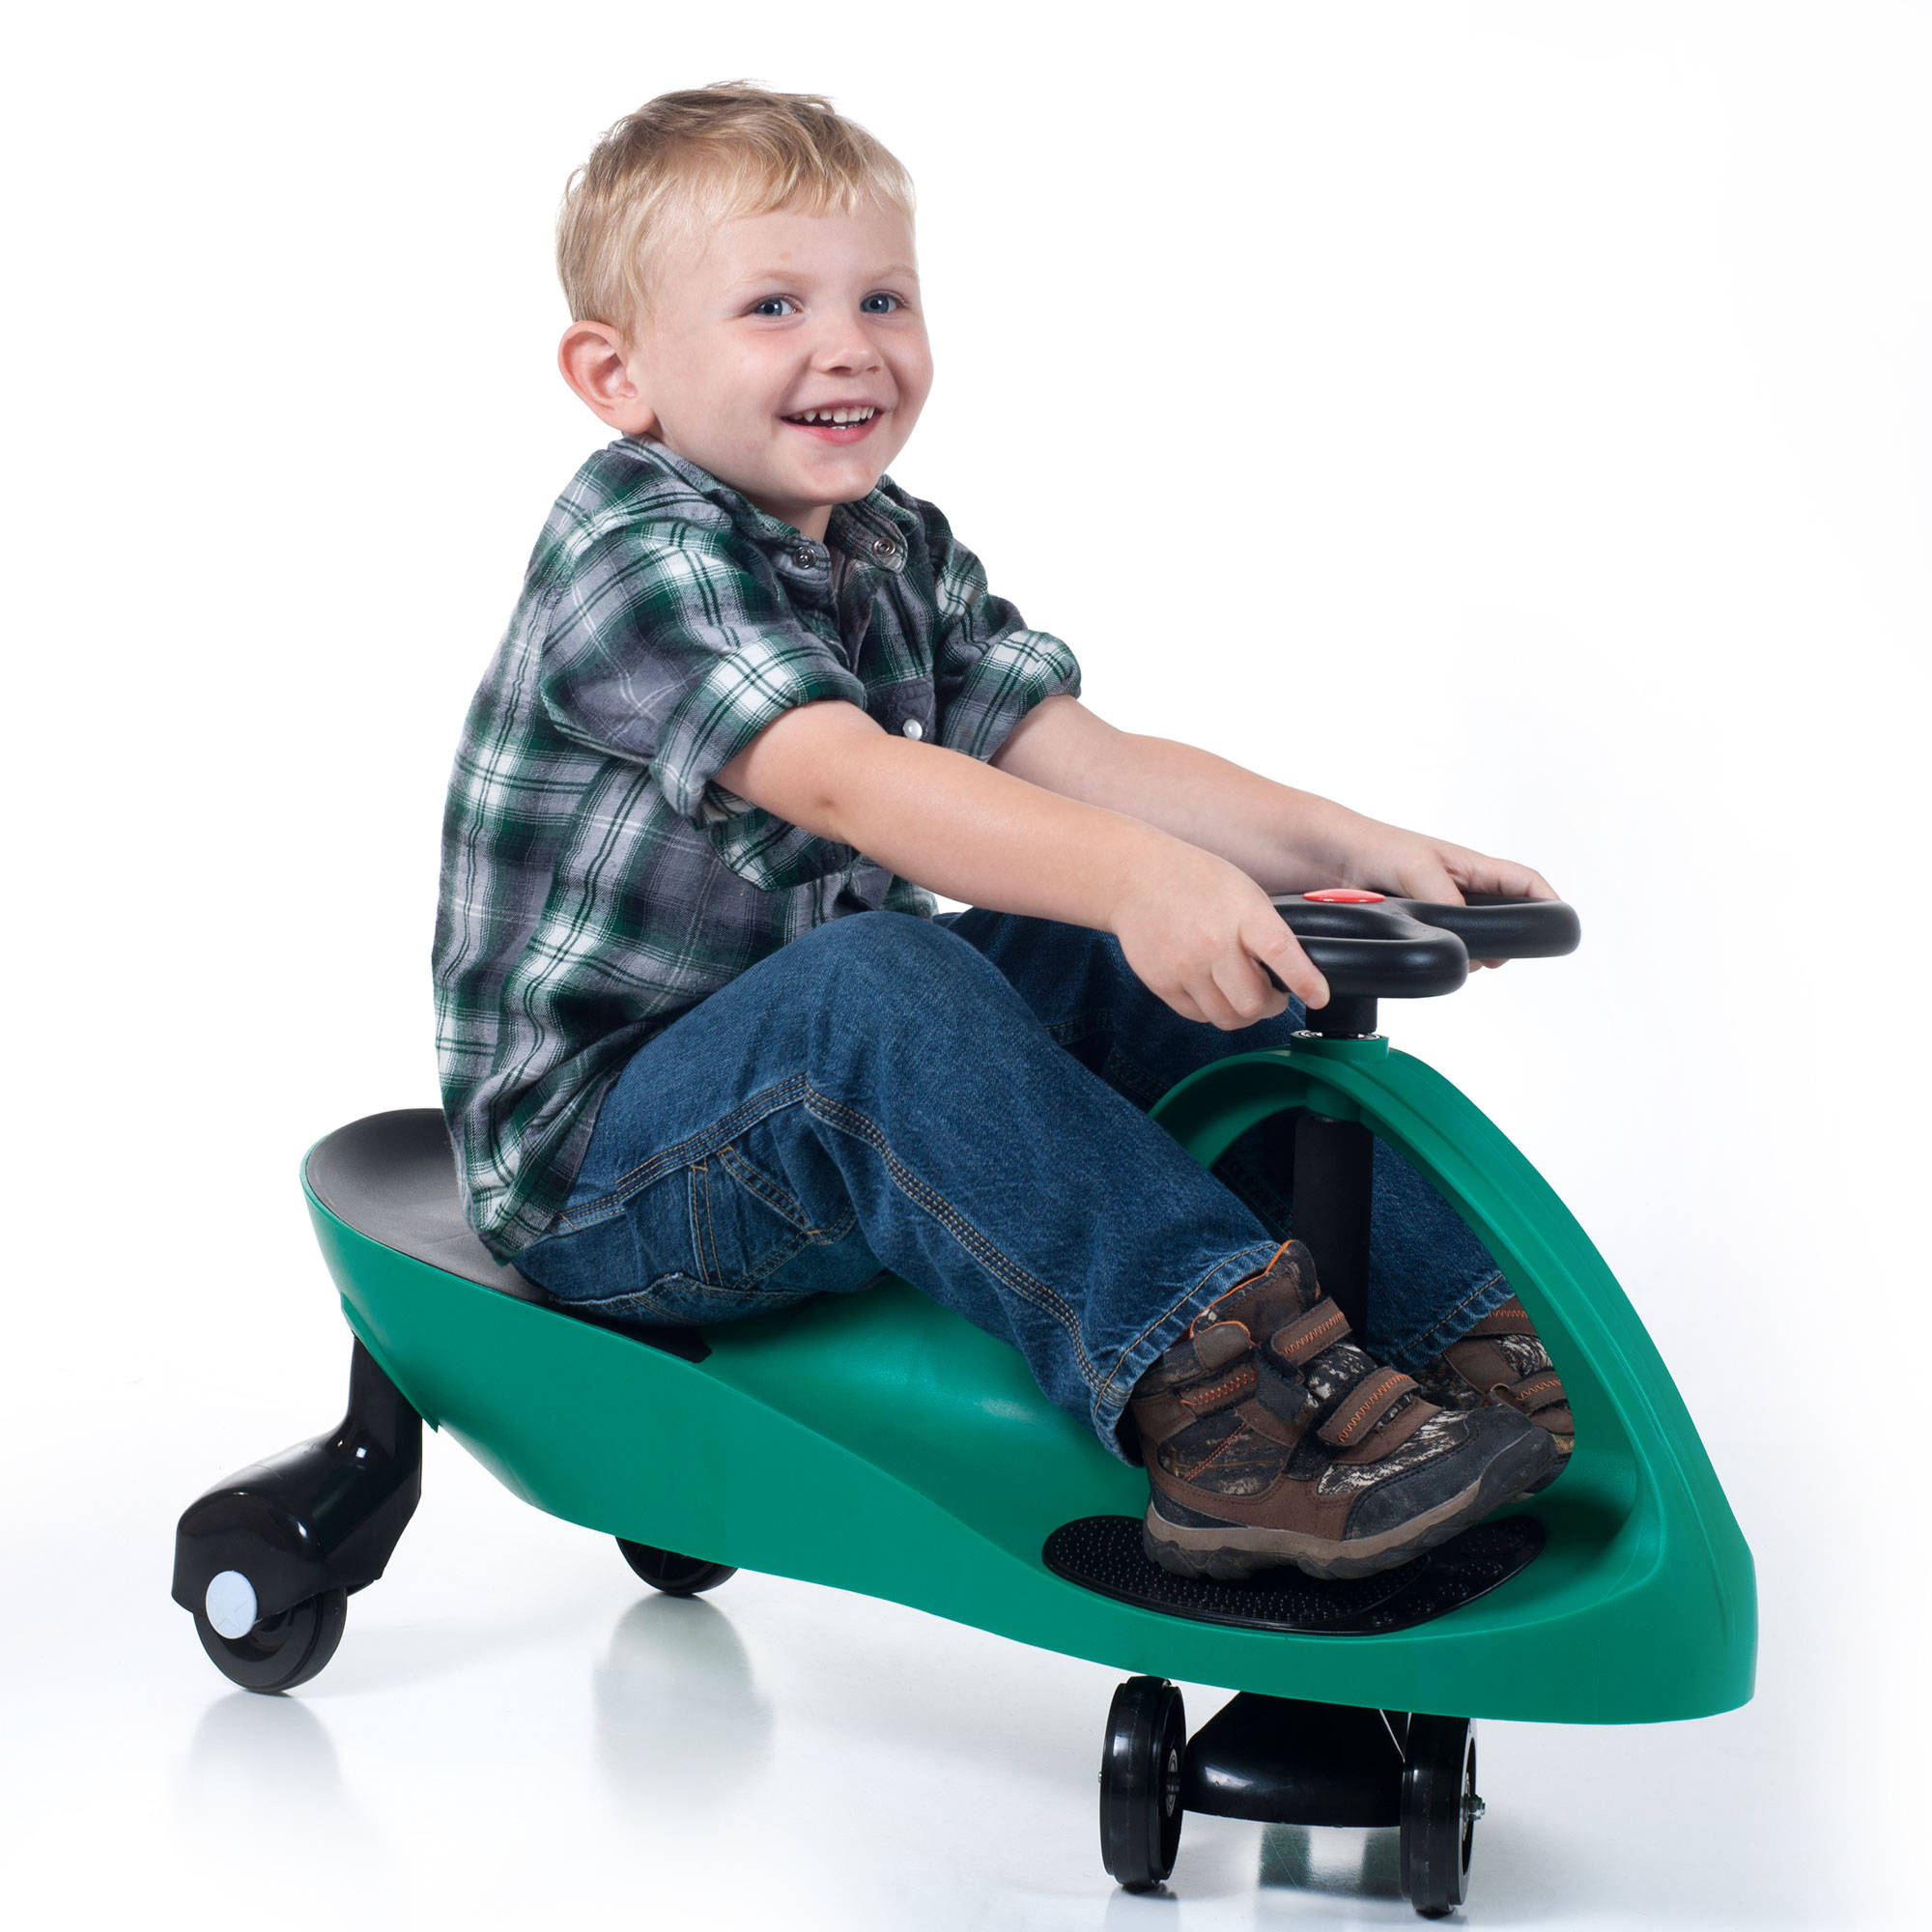 Lil’ Rider Wiggle Ride-On Car – Just $24.99!